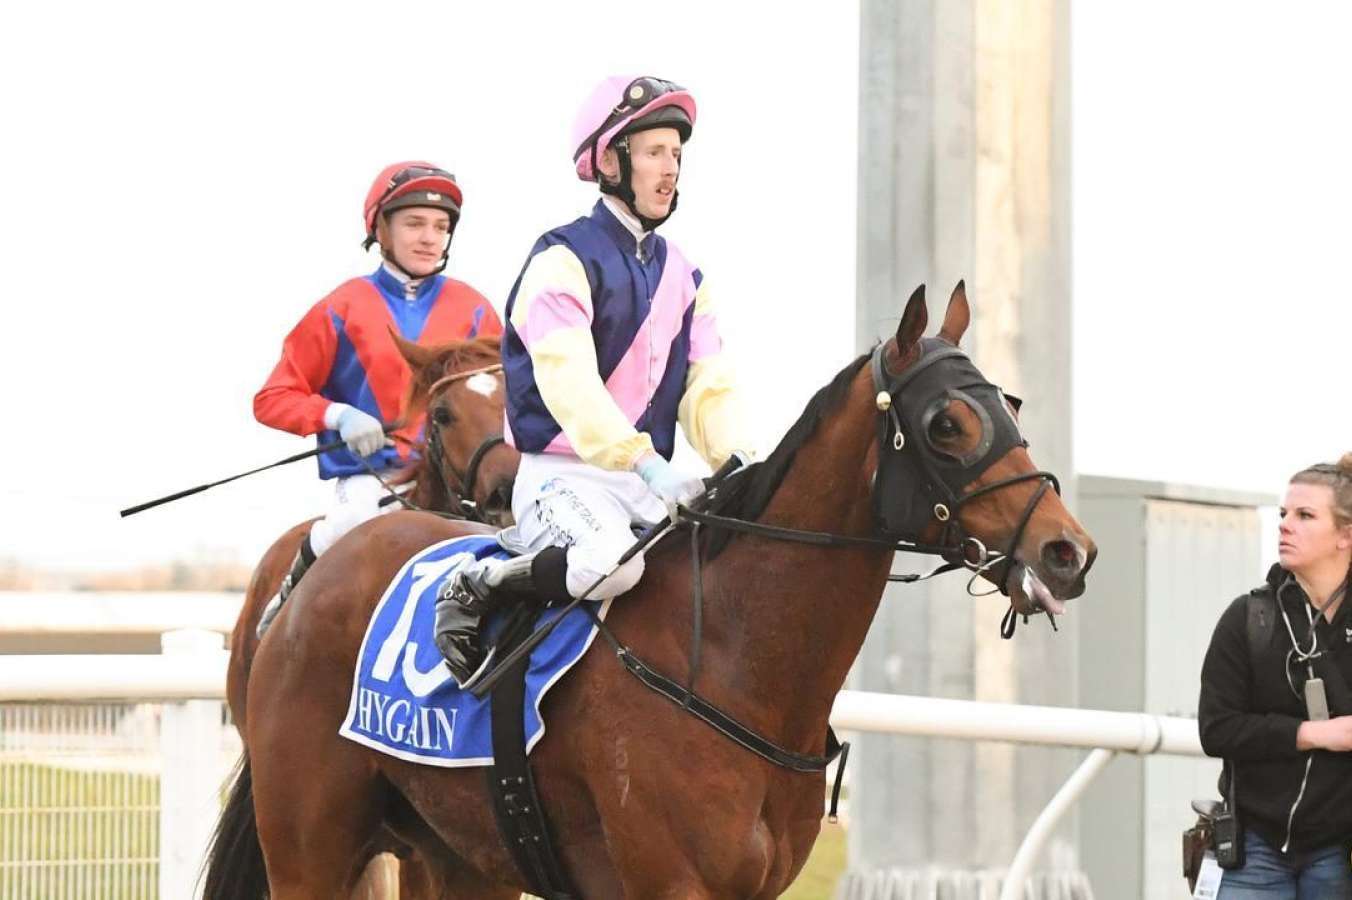 Jockey Nathan Punch collects first win after returning from concussion battles